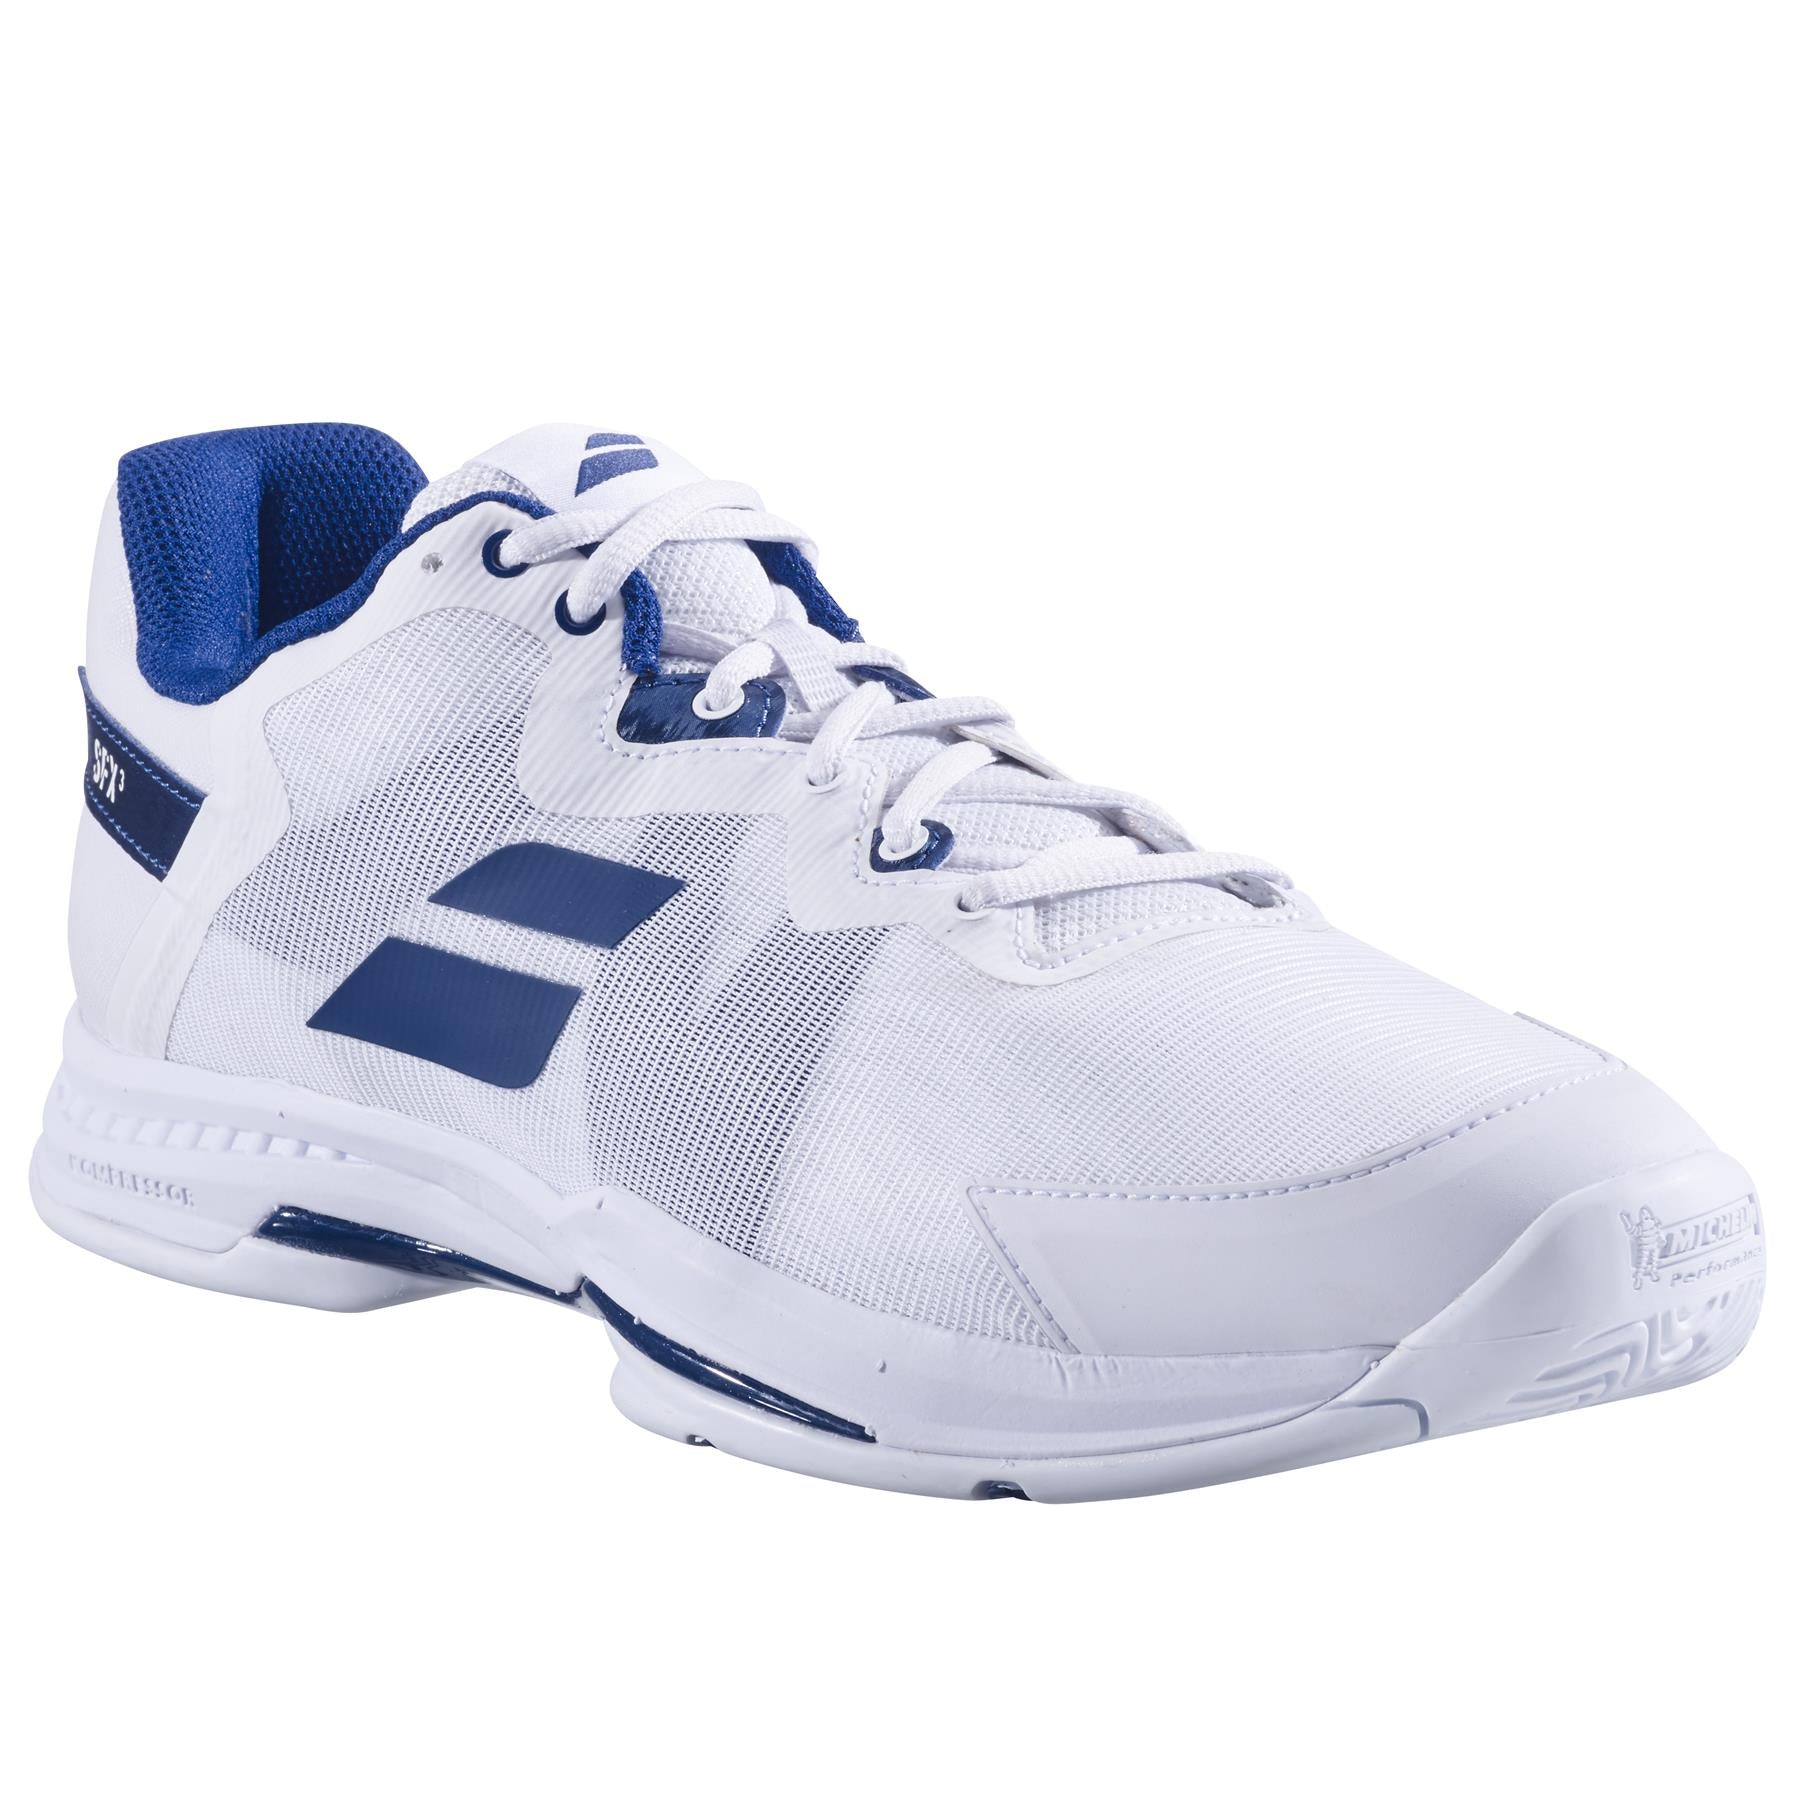 Babolat SFX3 All Court Mens Tennis Shoes - White / Navy - Angled